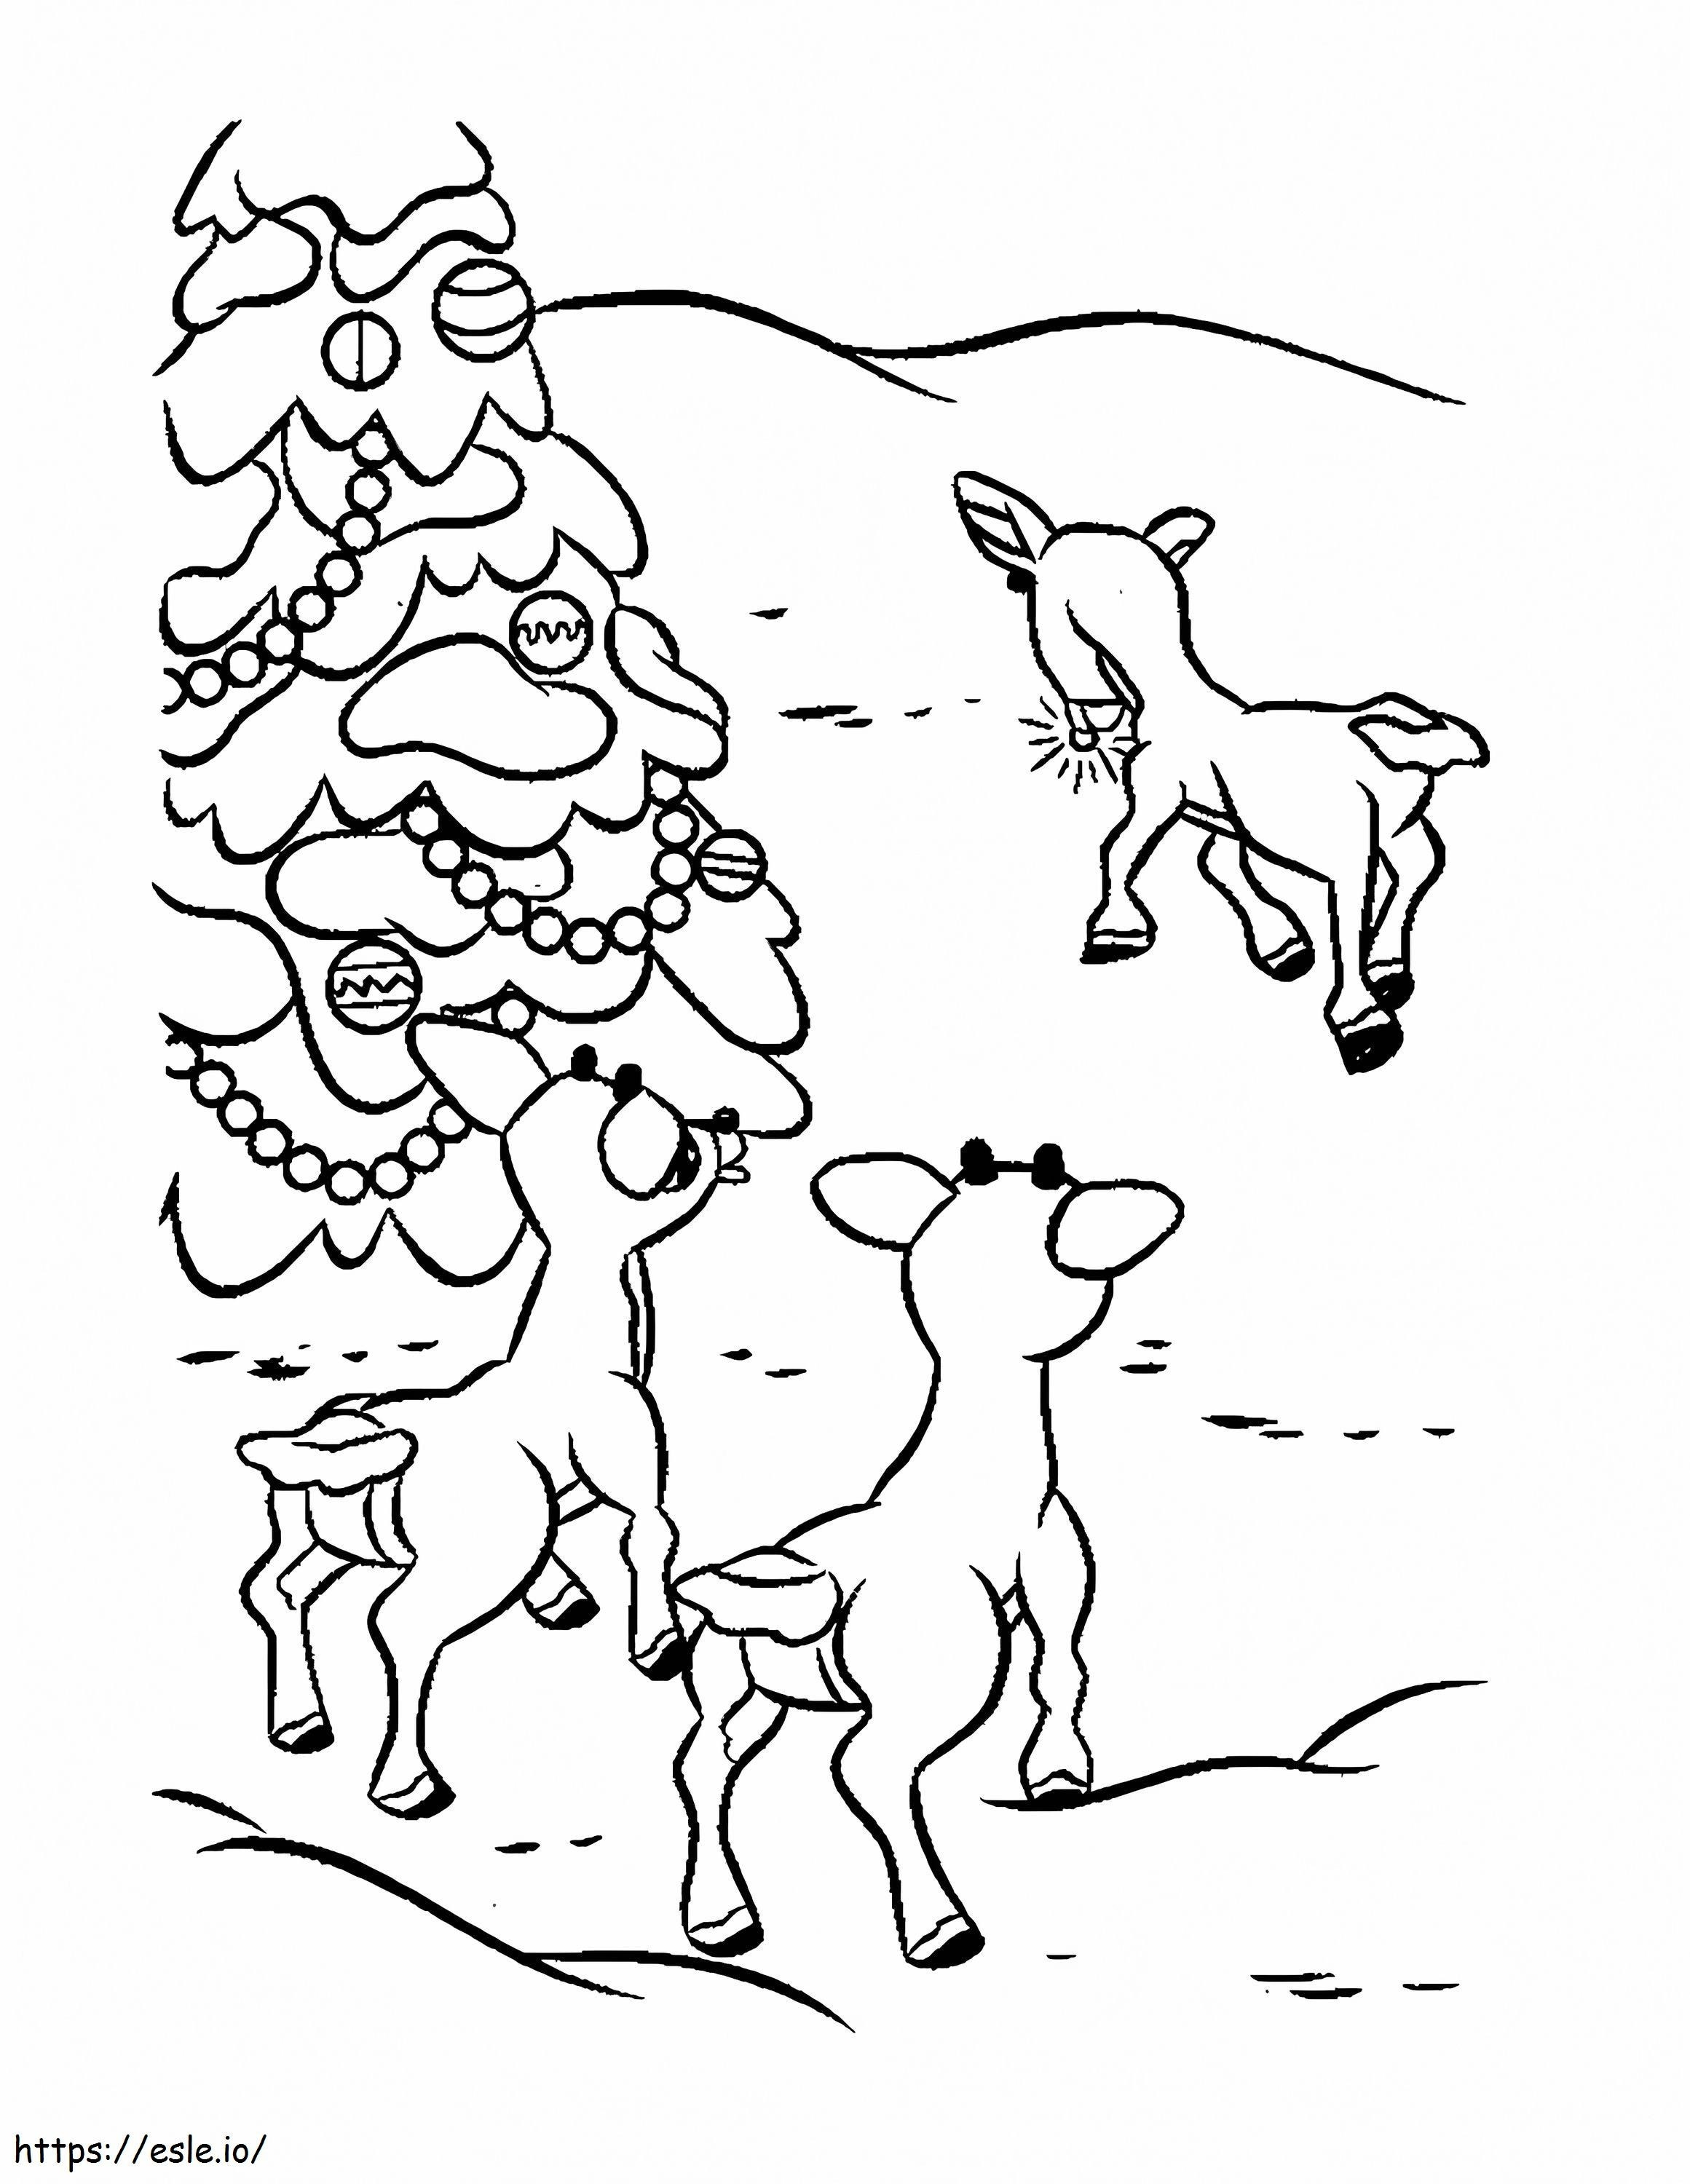 1582339762 Rudolph Printable coloring page